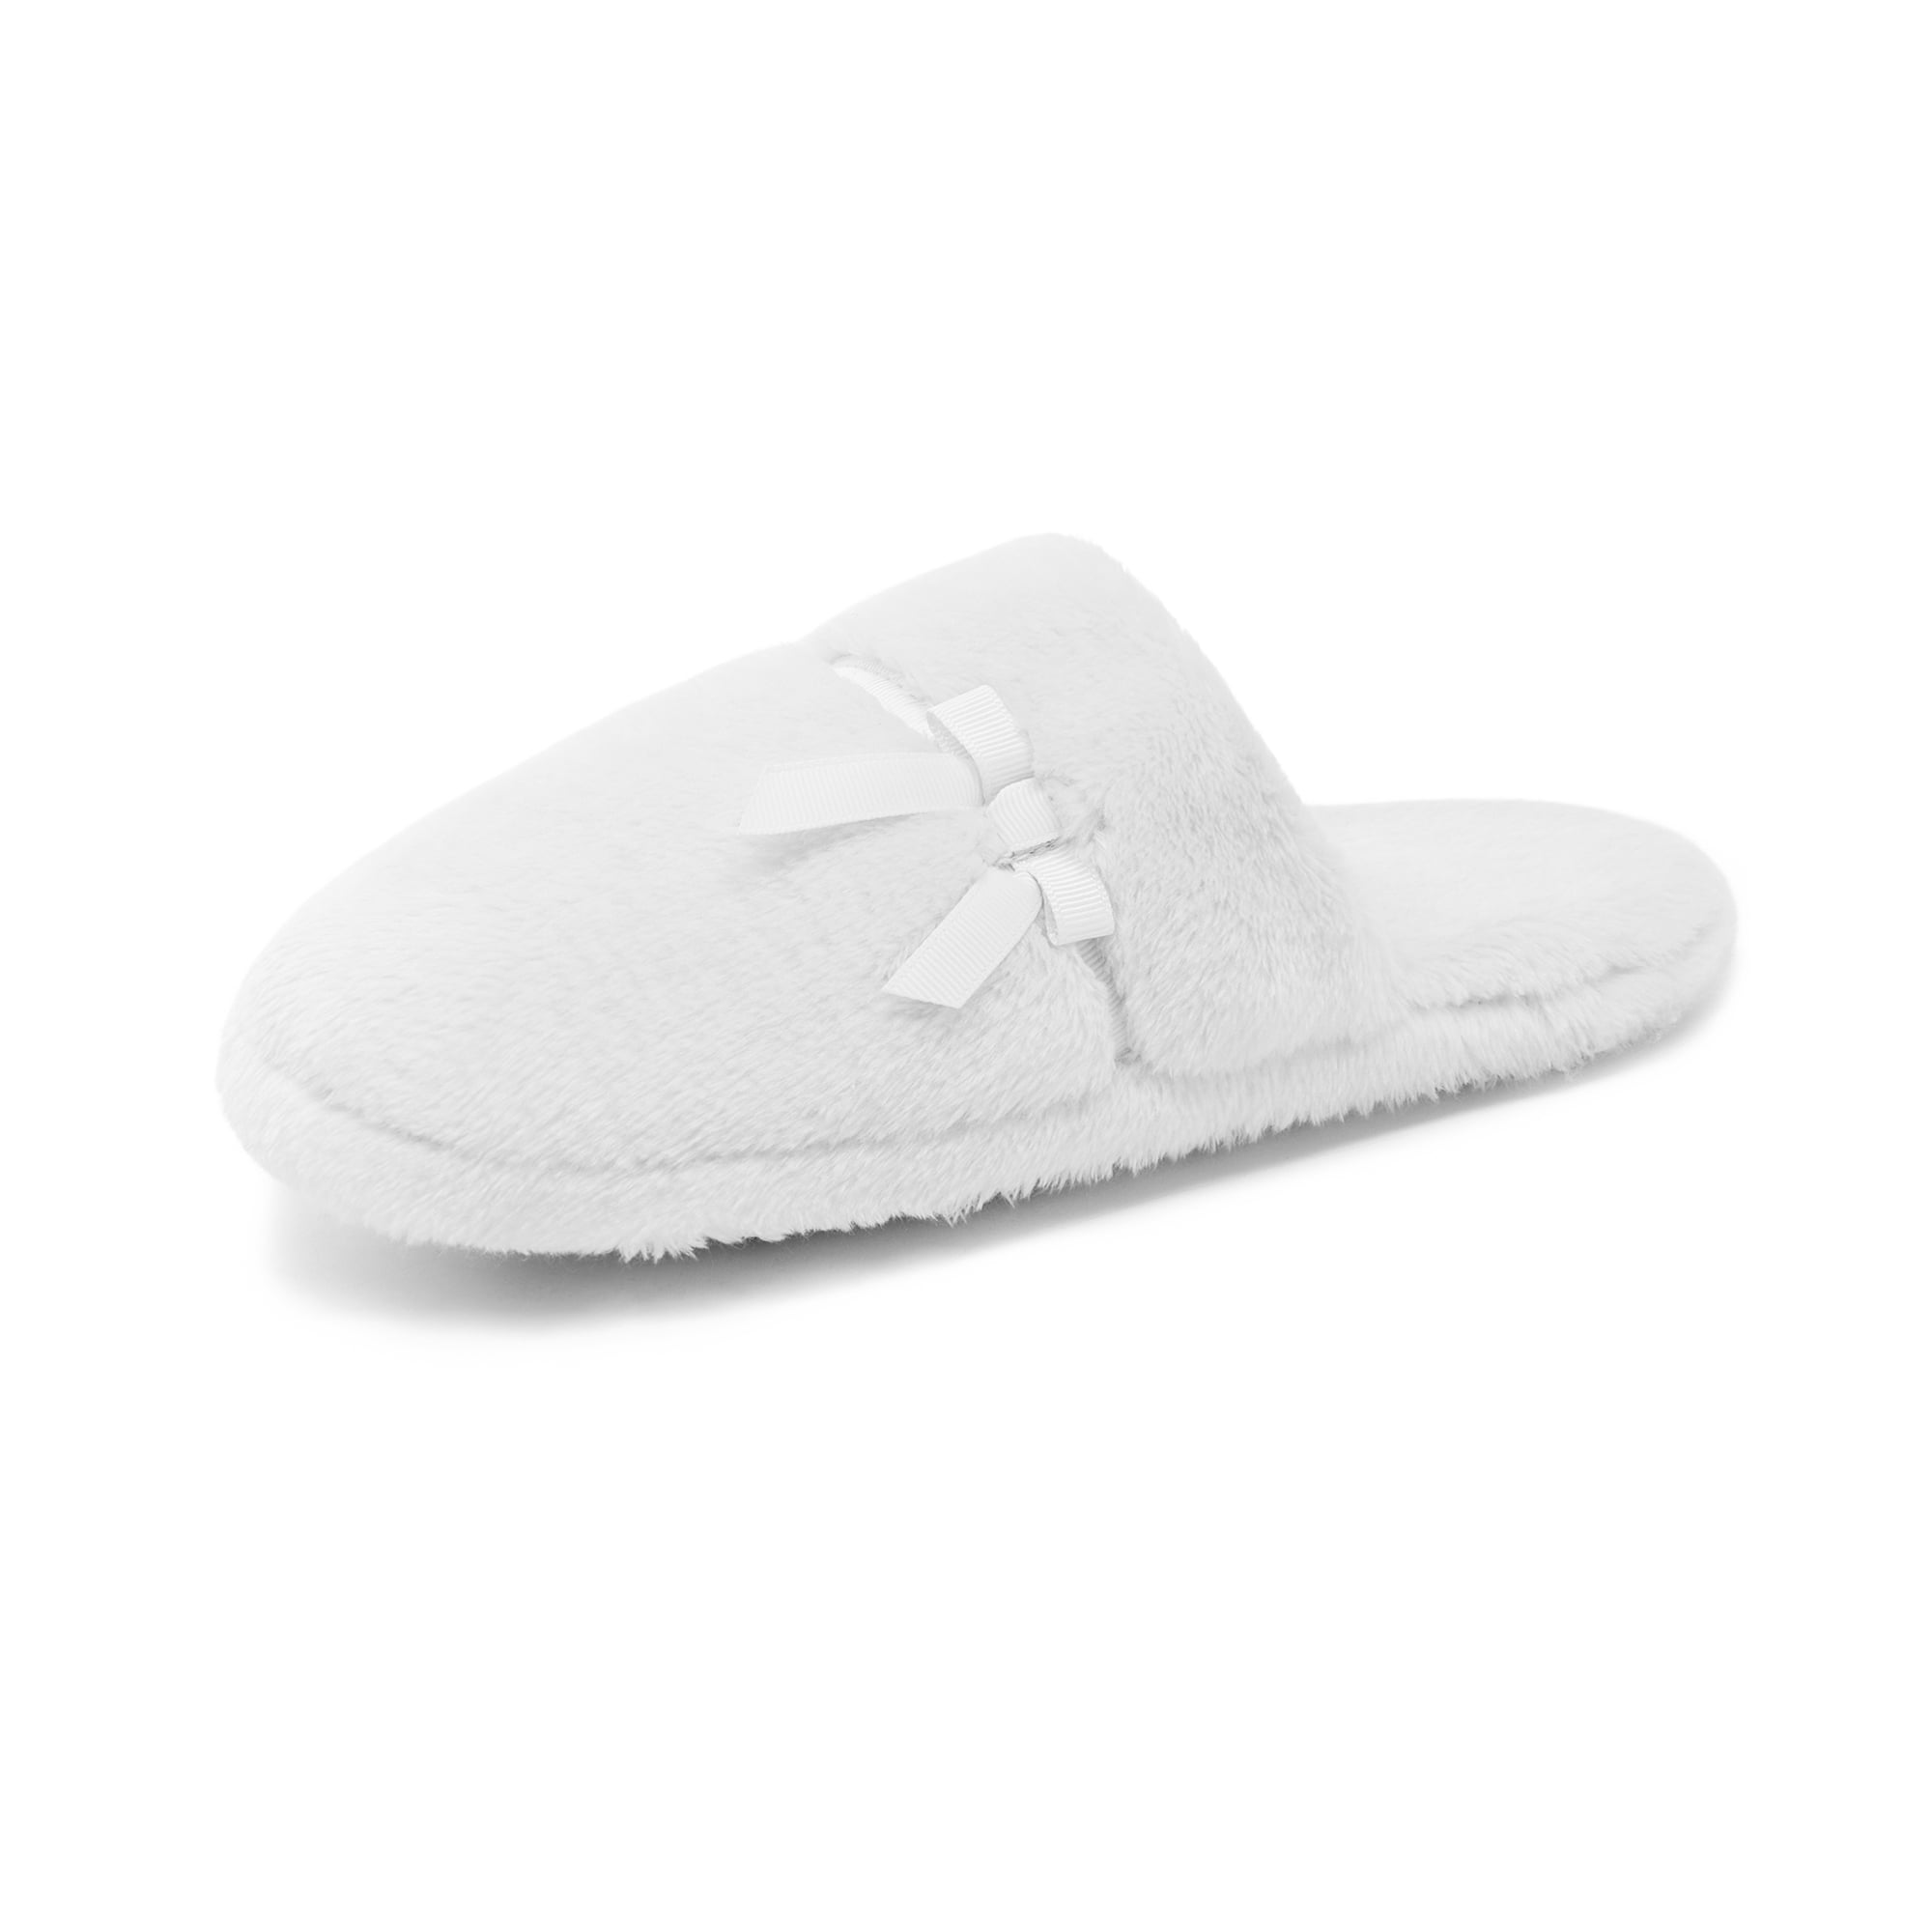 DREAM PAIRS Womens Auzy Winter Moccasins Slippers 